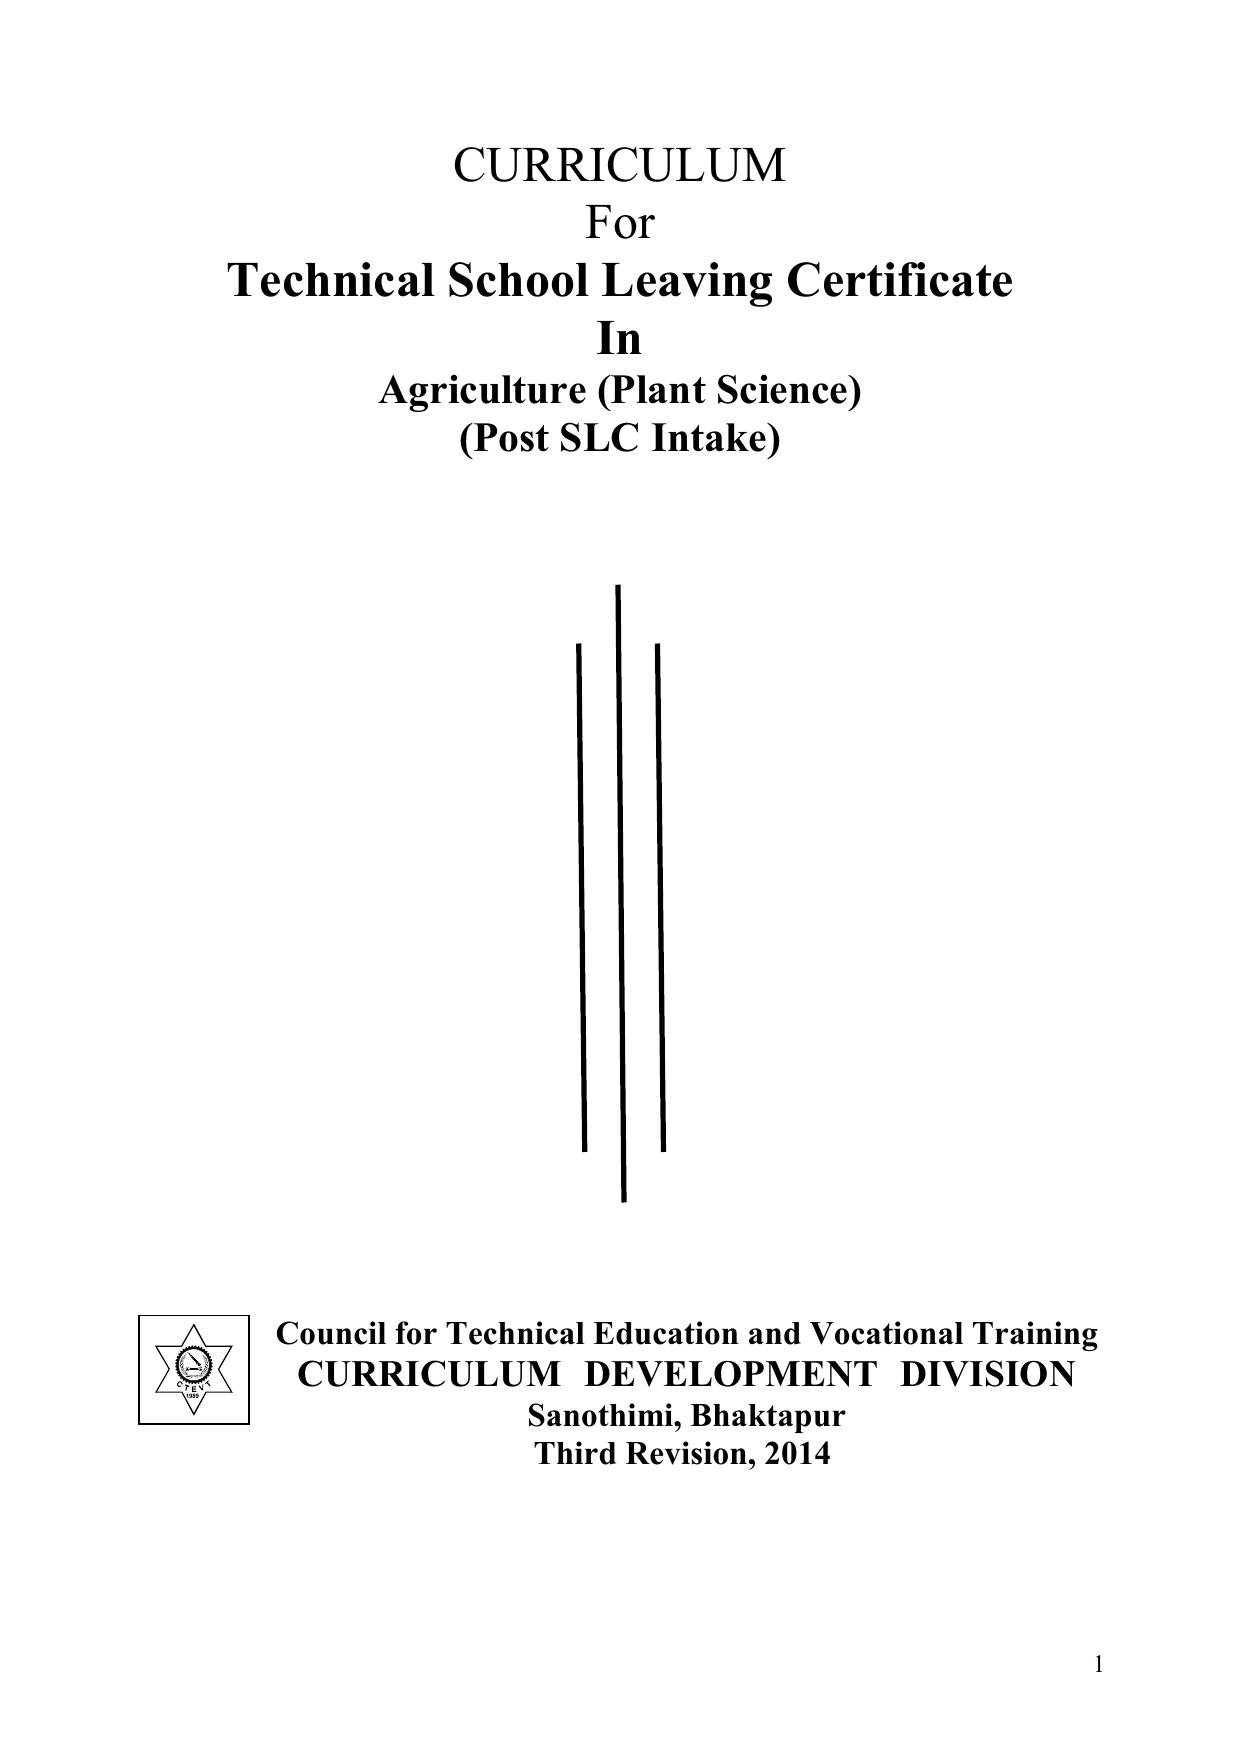 TSLC in Agriculture - Plant Science, Post SLC, 2014